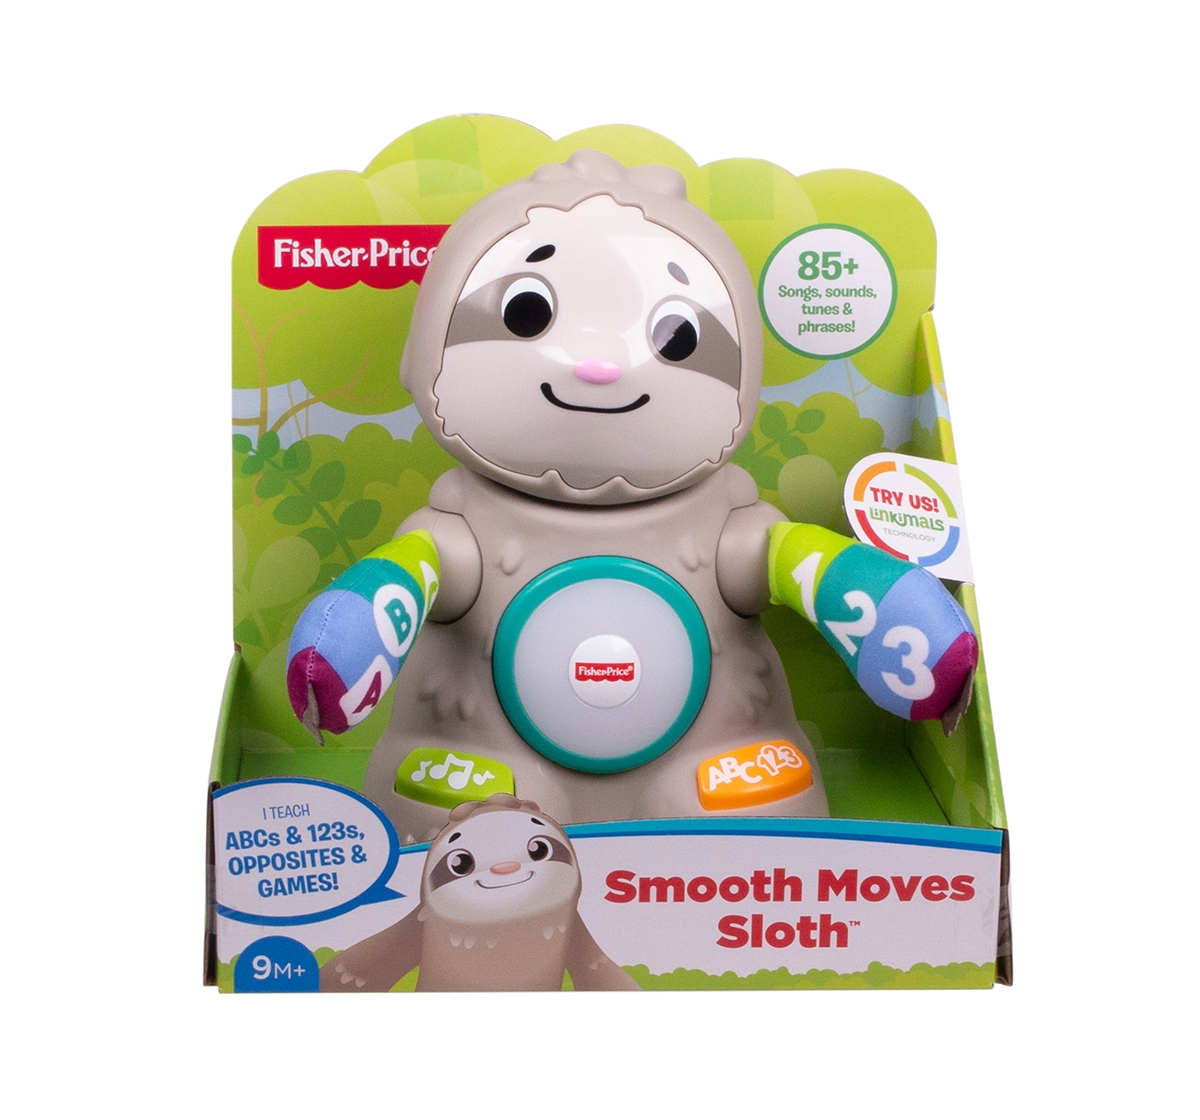 Fisher-Price | Fisher-Price Linkimals Smooth Moves Sloth Learning Toys for Kids age 9M+ 